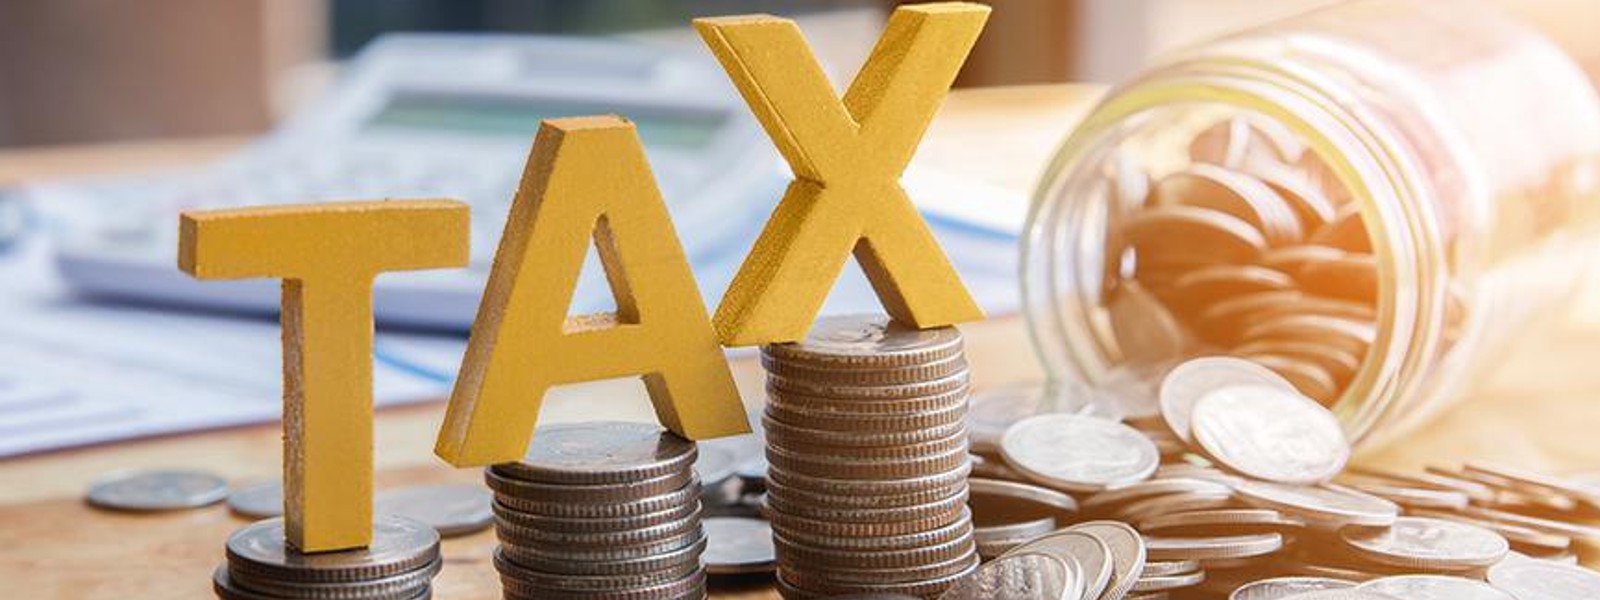 IMF recommends VAT & Income Tax increases